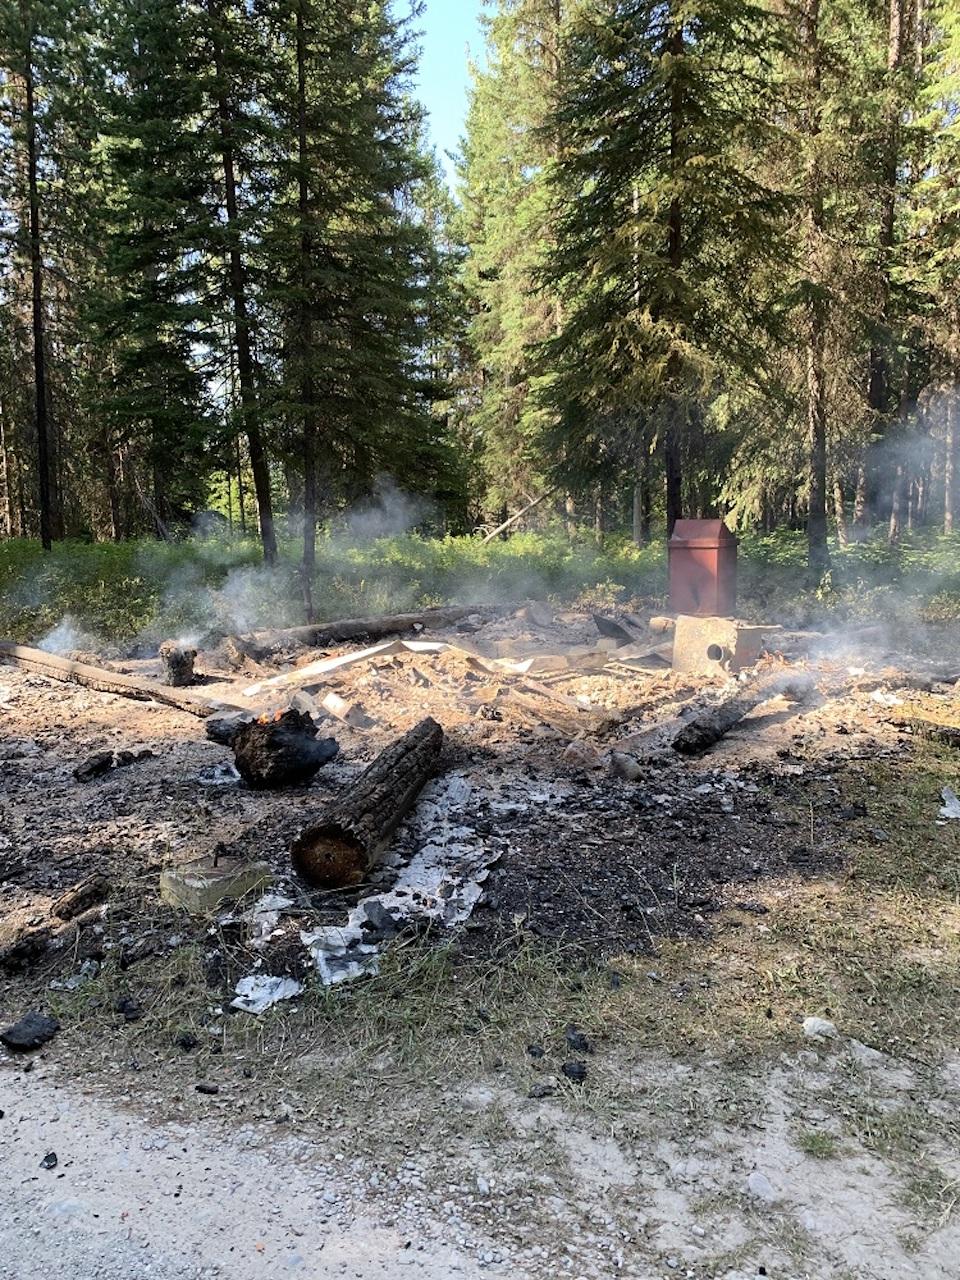 A reward of up to $10,000 is being offered for information leading to the arrest of whomever set a series of fires in and near Glacier National Park/NPS